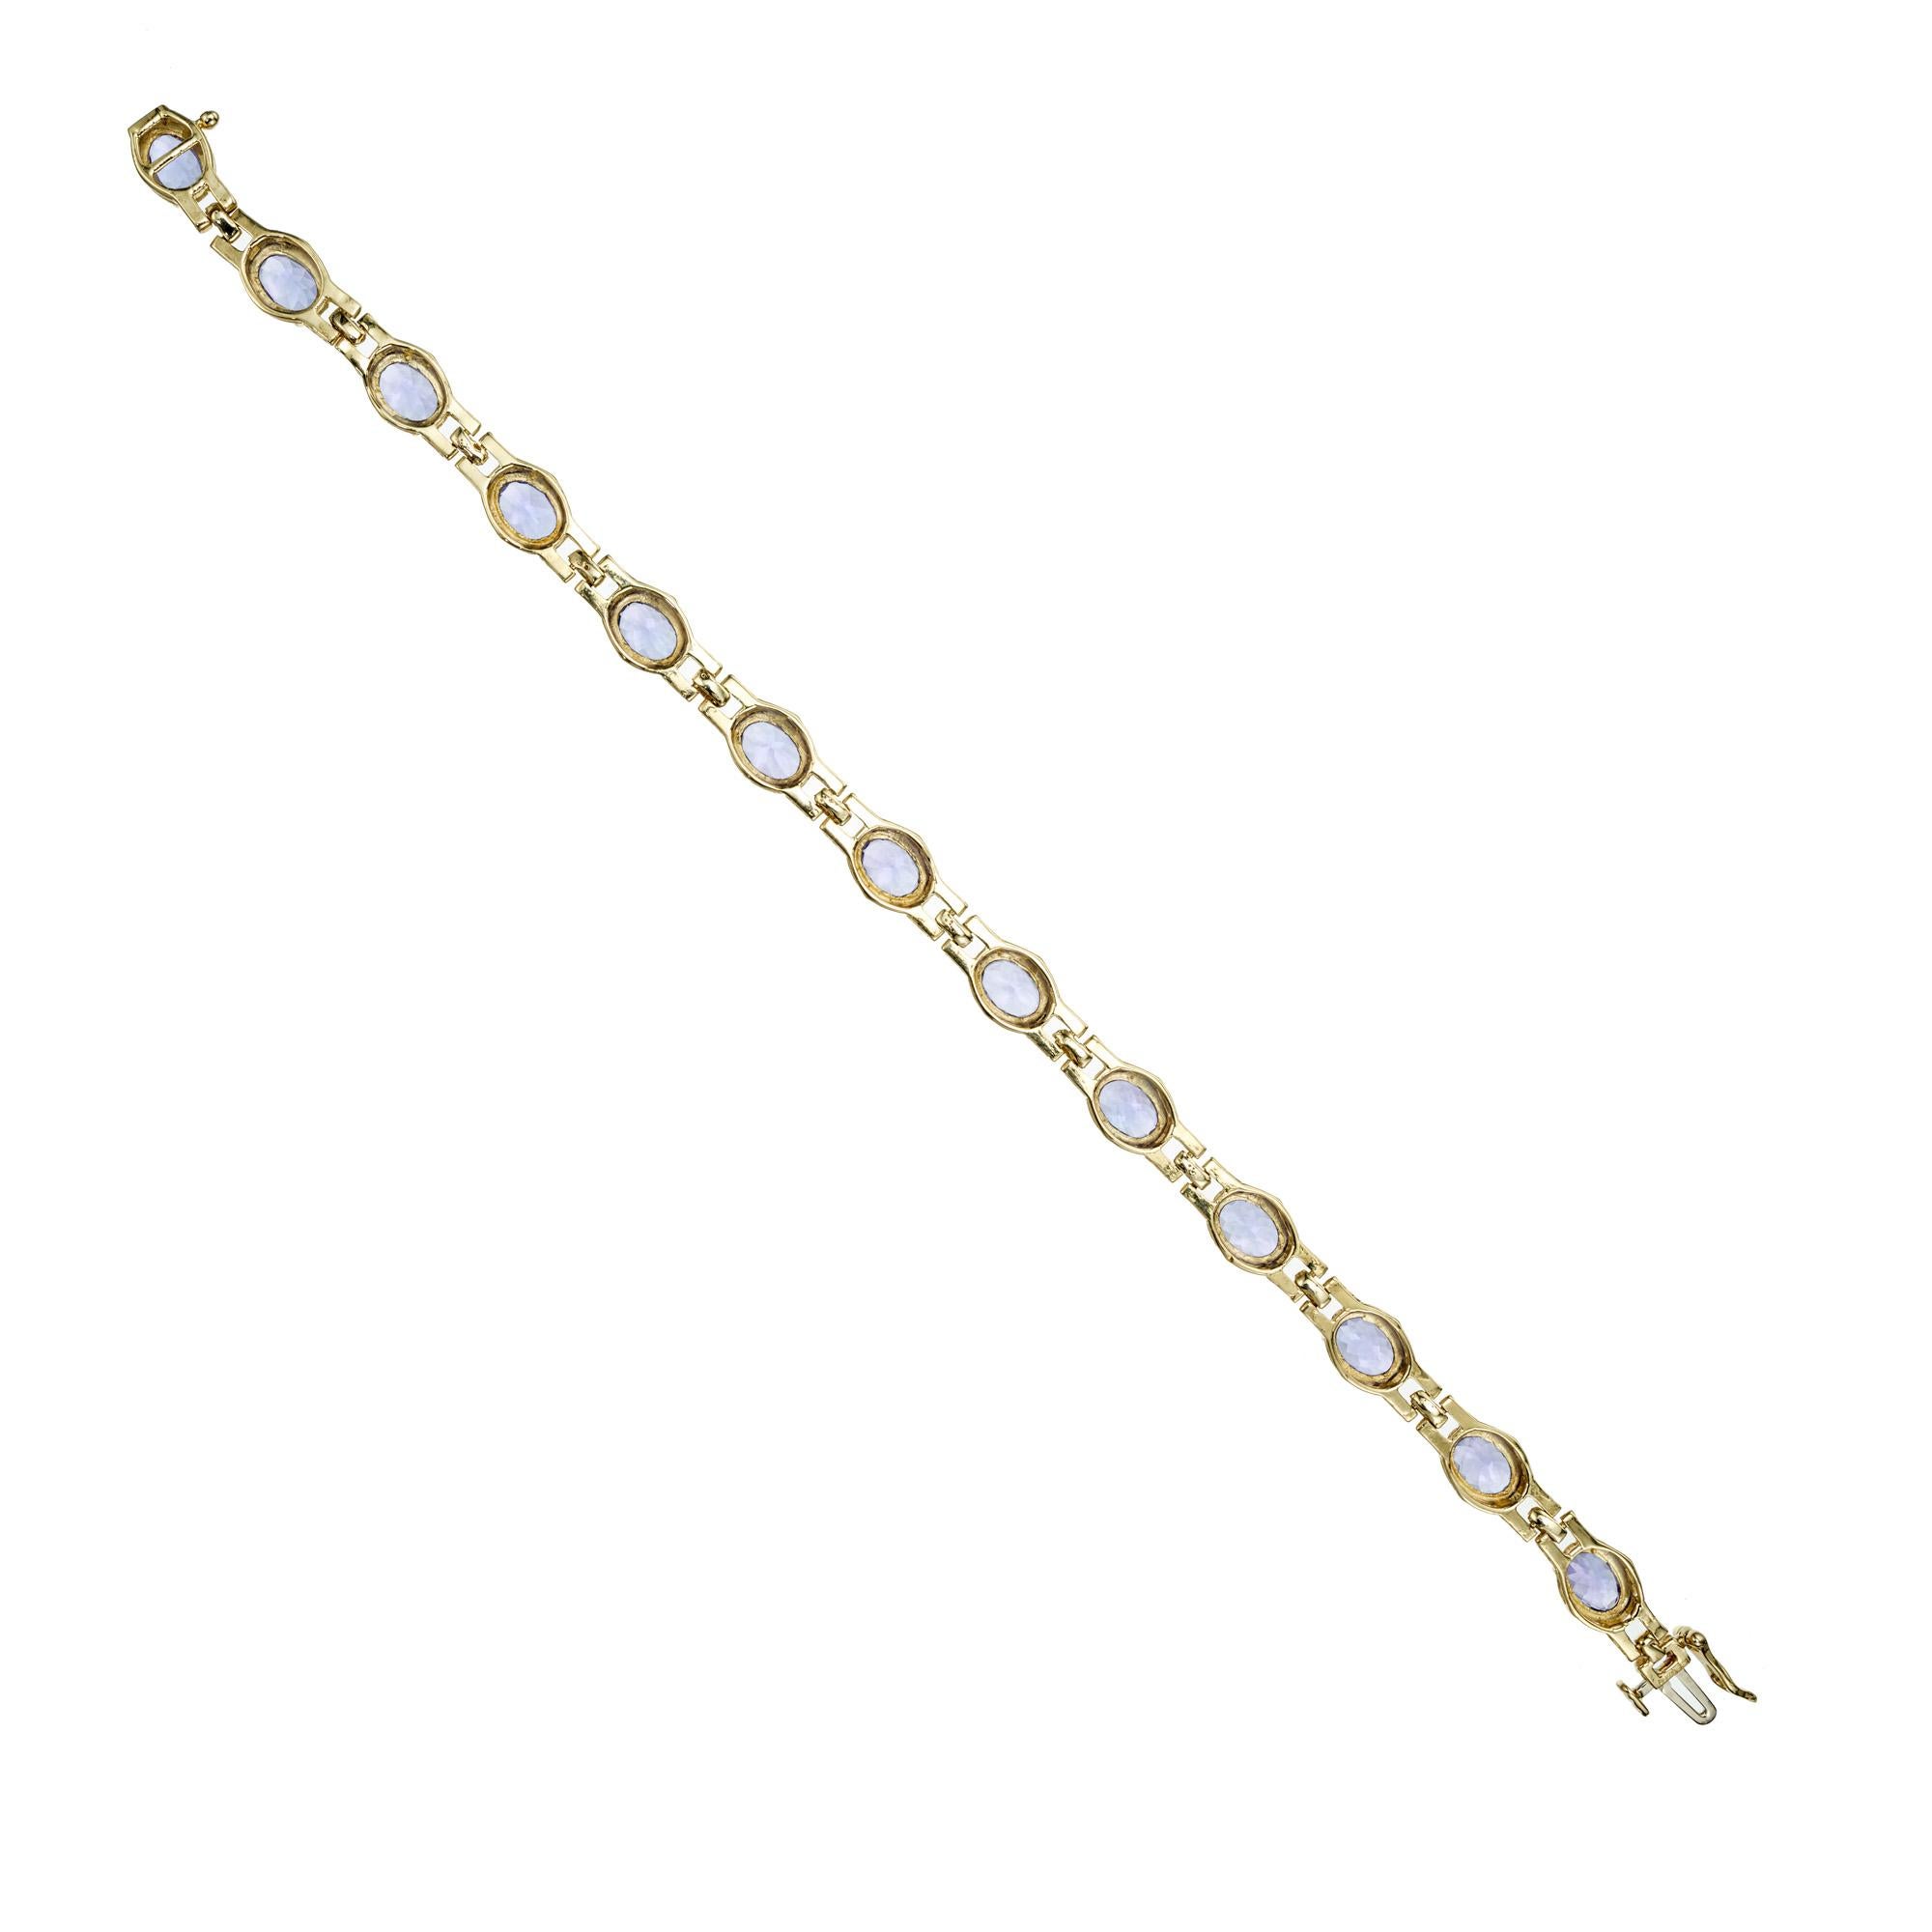 Le Vian tanzanite link bracelet. 13 oval blue tanzanite gemstones, set in a 14k yellow gold prong link bracelet which has a 3 row panther link between the stones. 8 inches long. 
Le Vian is known for its LOVE of reinventing several categories of